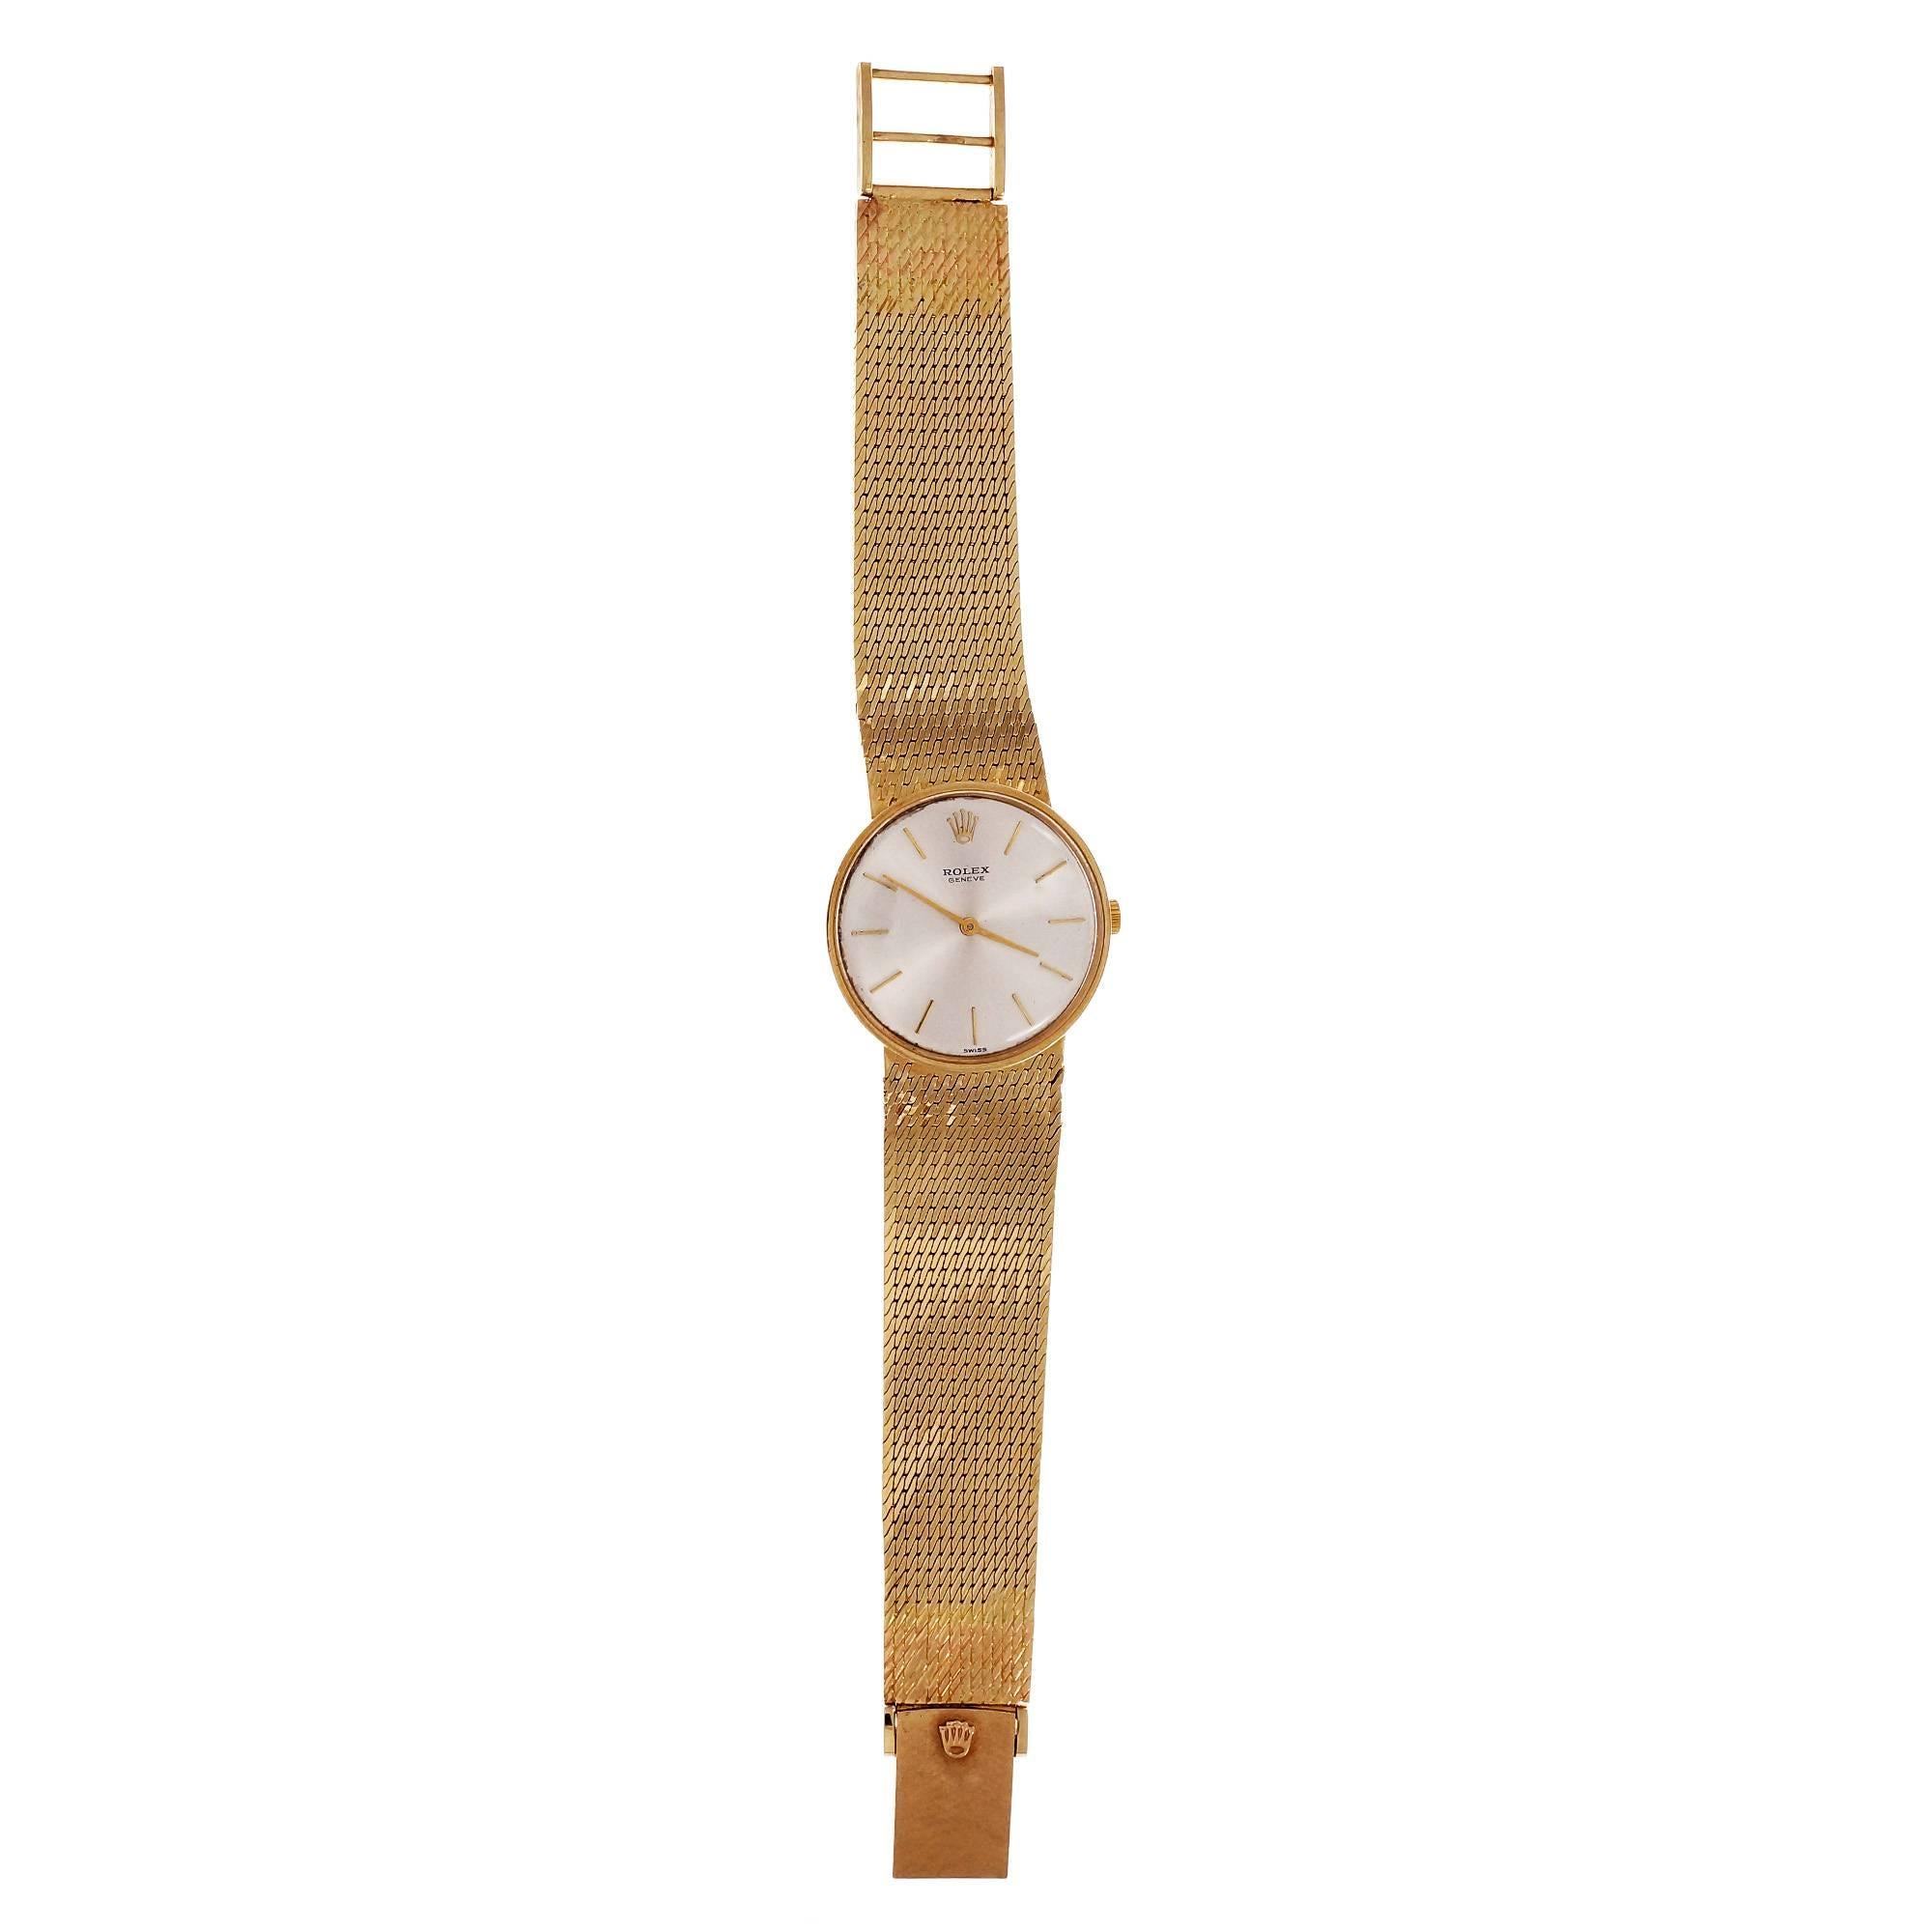 Rolex solid 14k gold dress watch circa 1960 with manual wind 17 jewel Rolex movement and mesh watch band attached. Extenders have been put on both ends of the mesh band to lengthen it to 7 1/8 inches. Hand engraving blends in the extenders well from